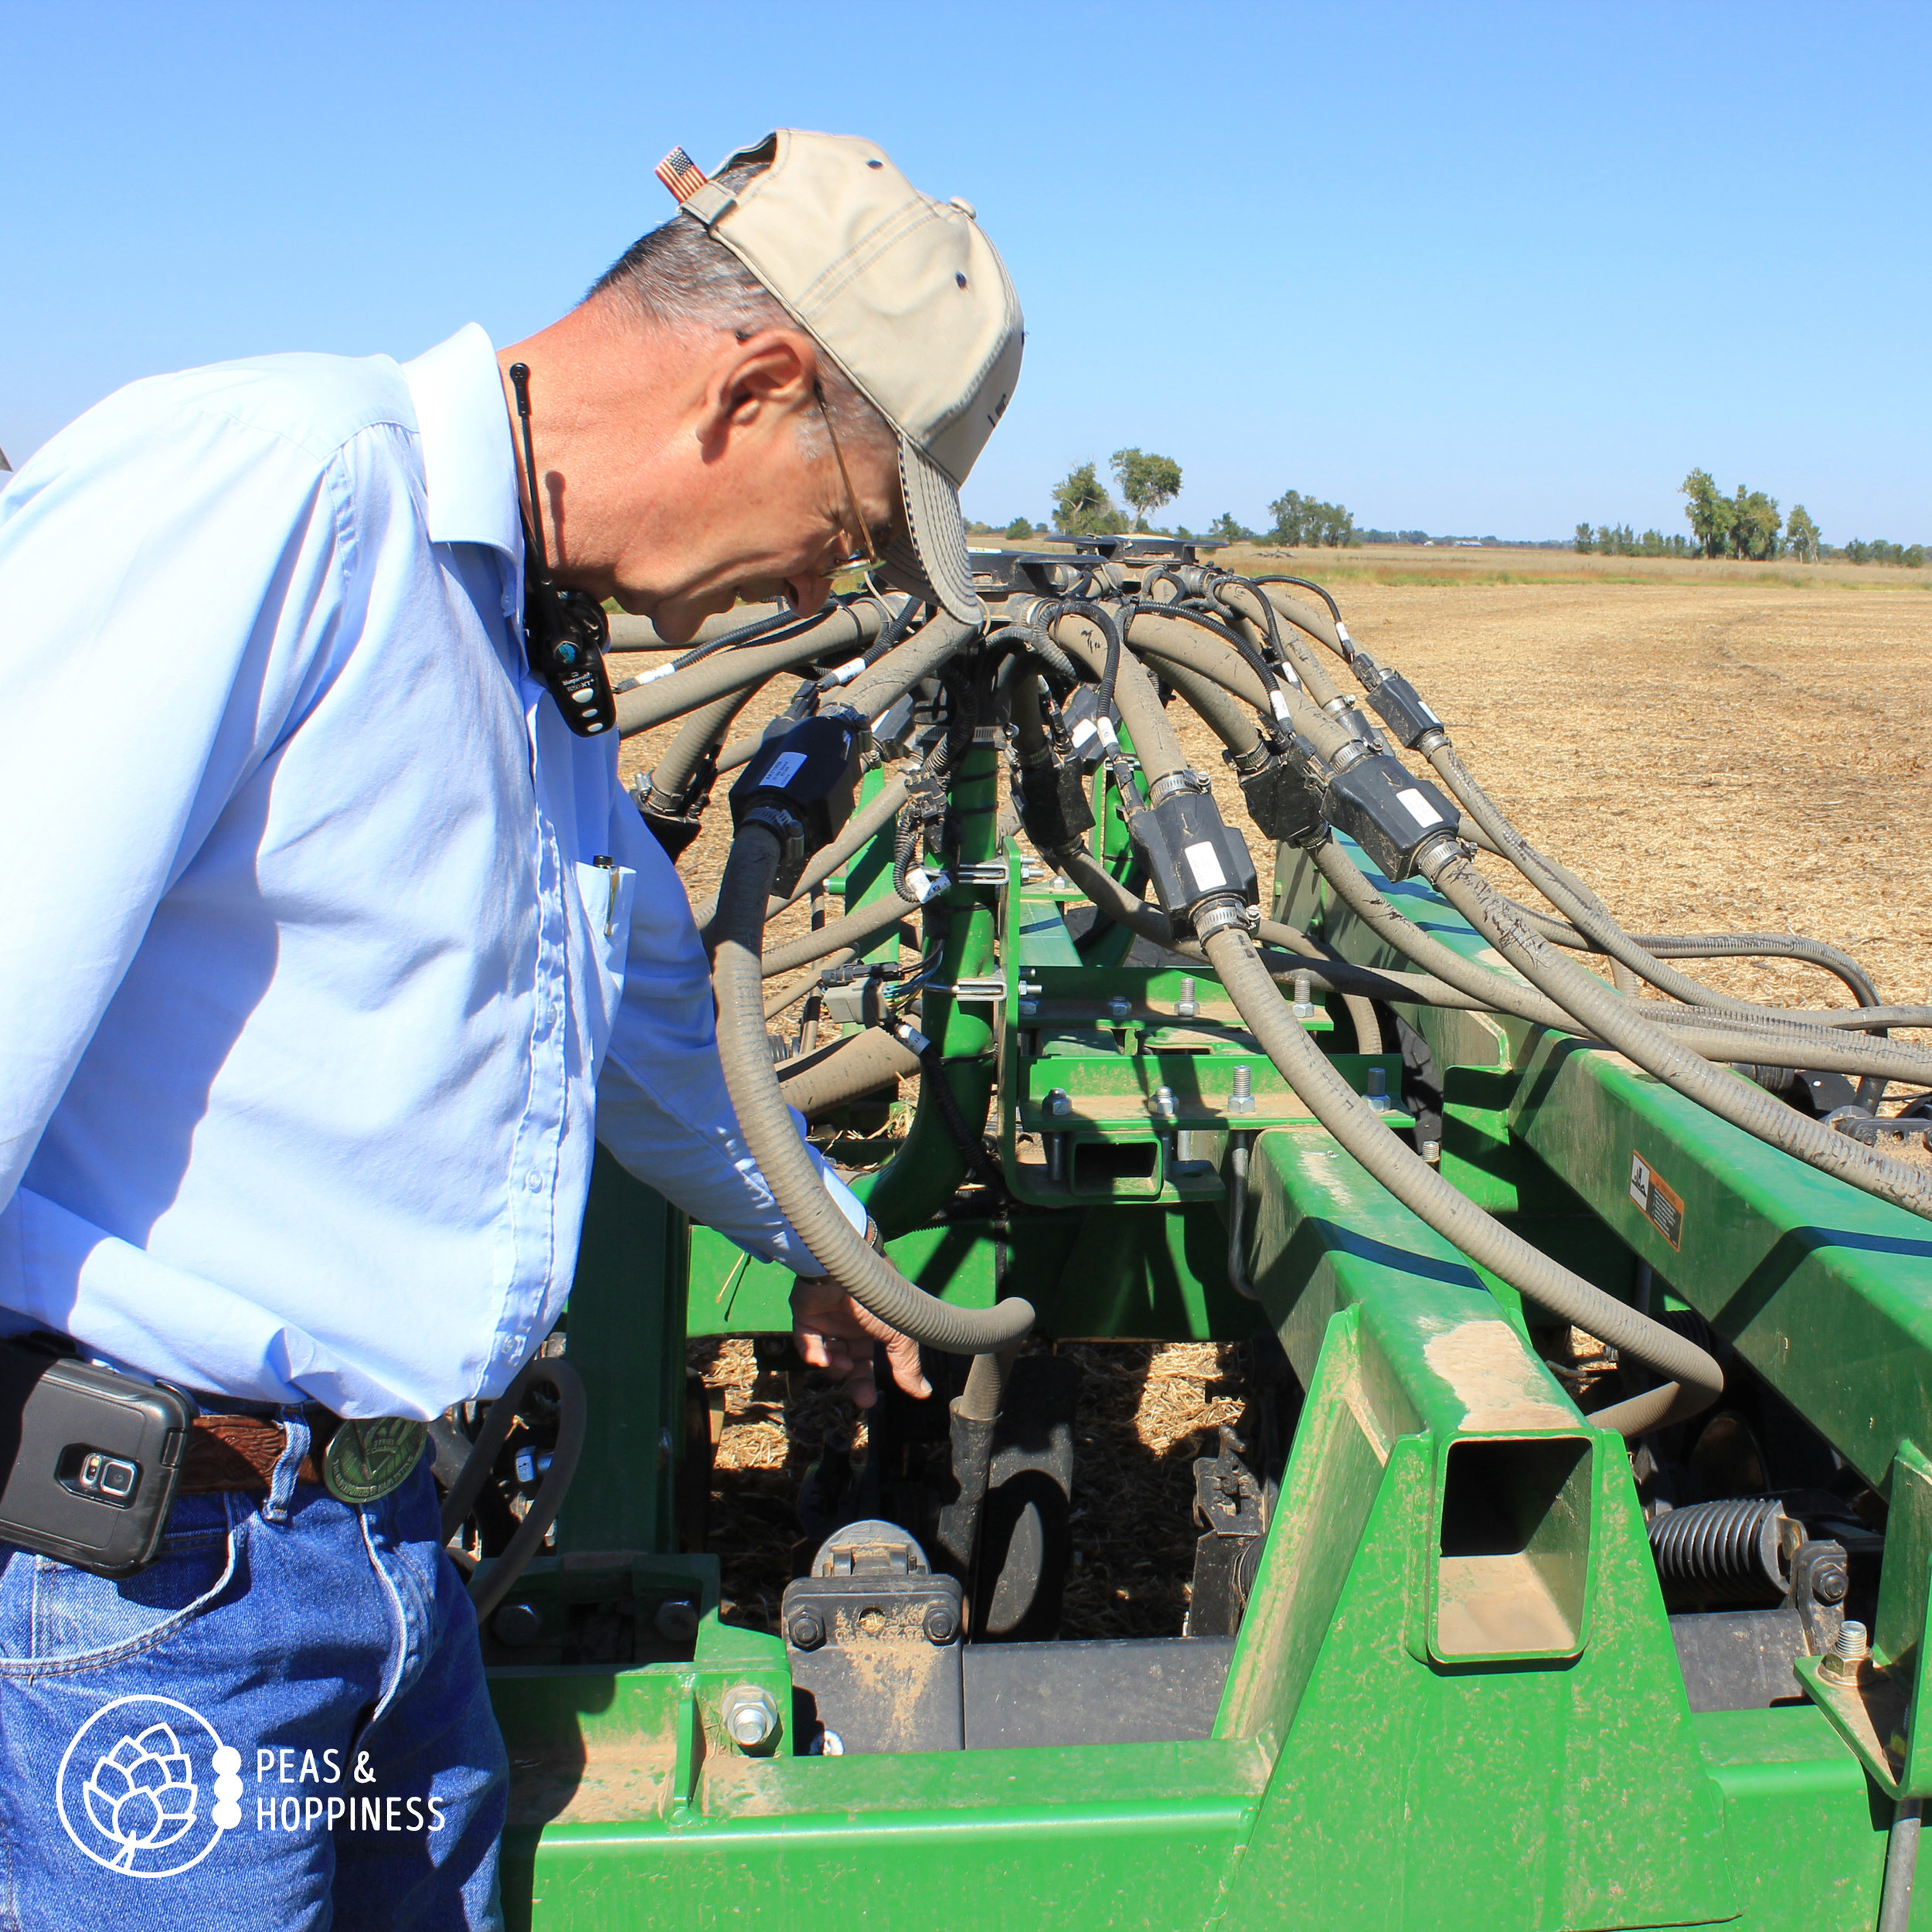 Dad explaining the workings of the air-seeder, used to plant soybeans, grain sorghum, and wheat, among other grains